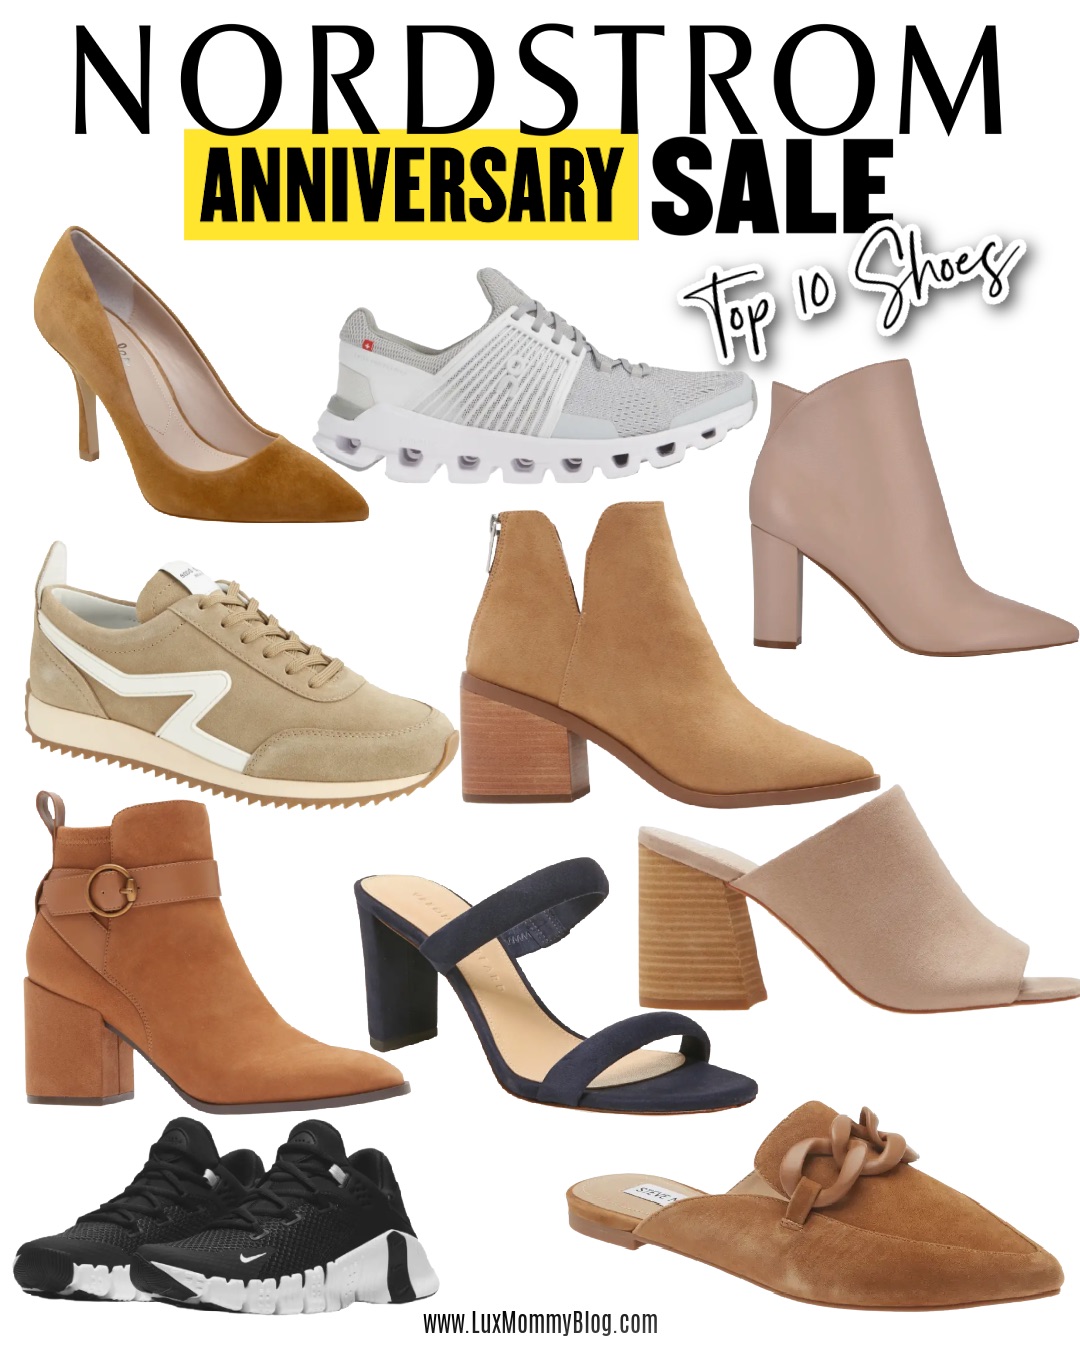 Nordstrom Anniversary Sale Top 10 Shoes LuxMommy